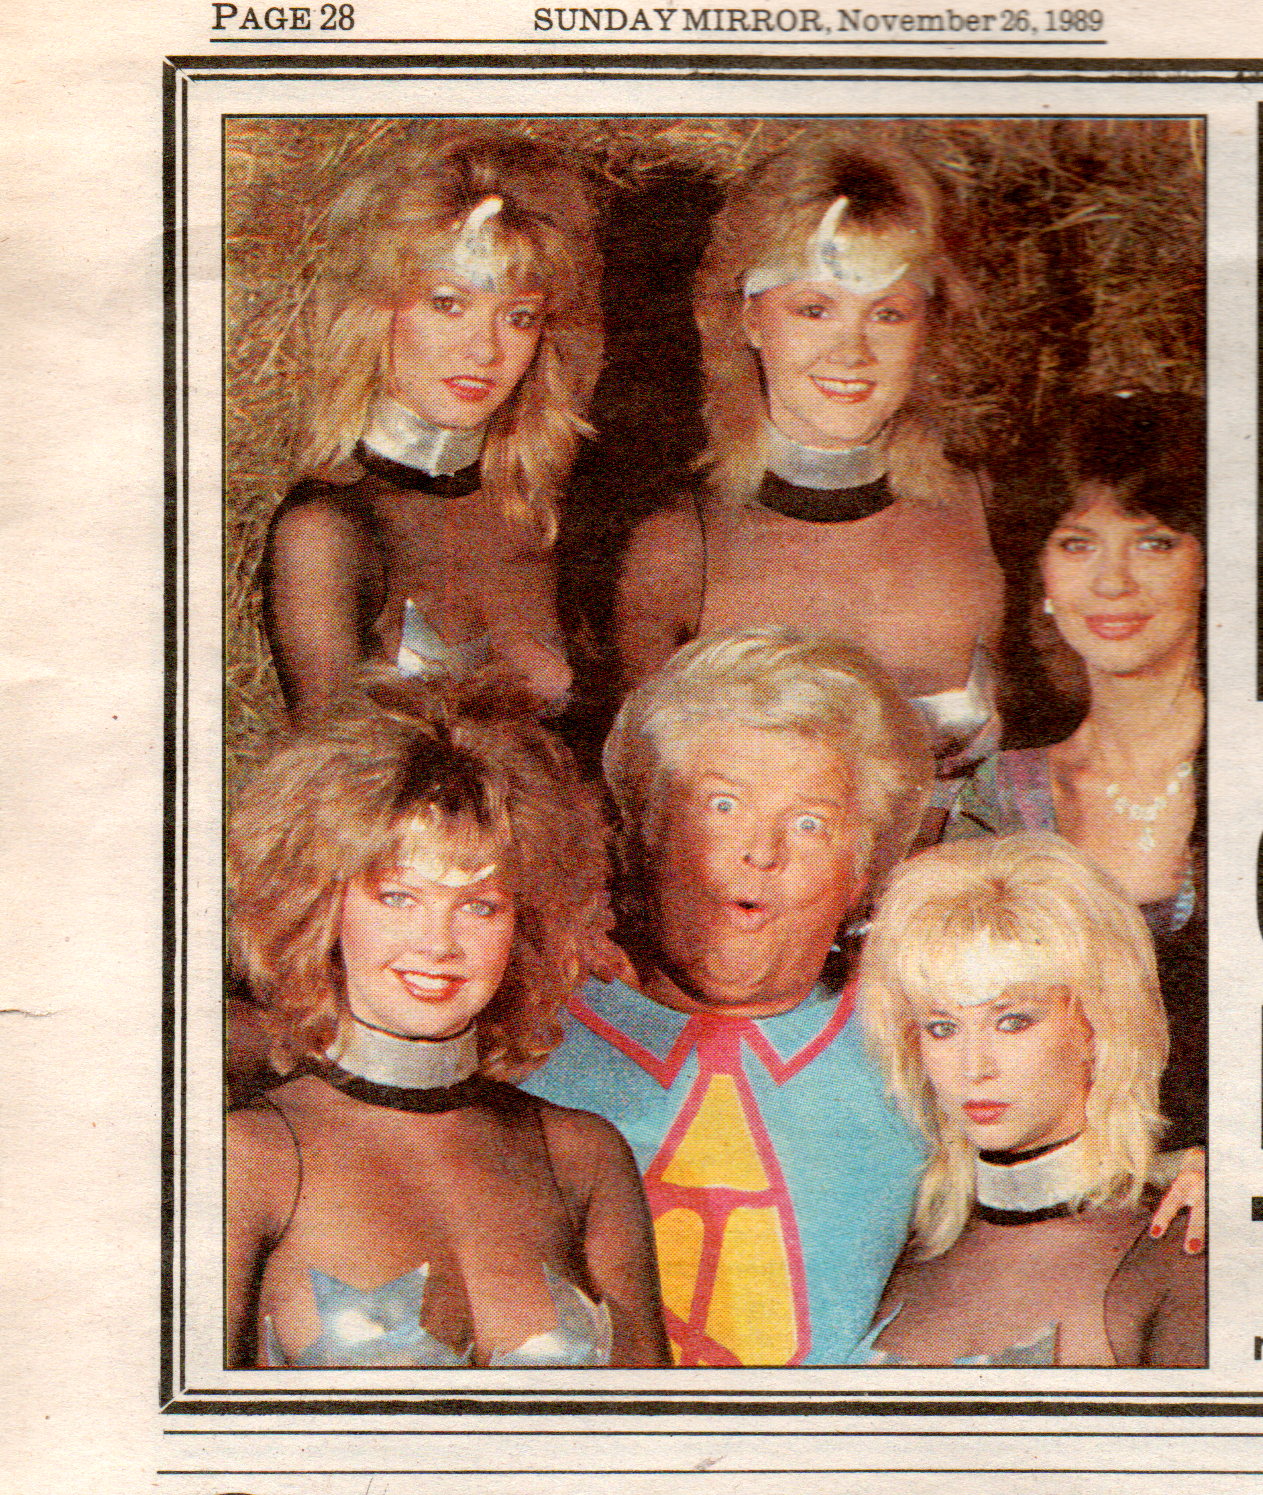 Benny Hill show. Front row, Corinne Russell with Benny Hill & Lindy Benson, as Wonderwoman.